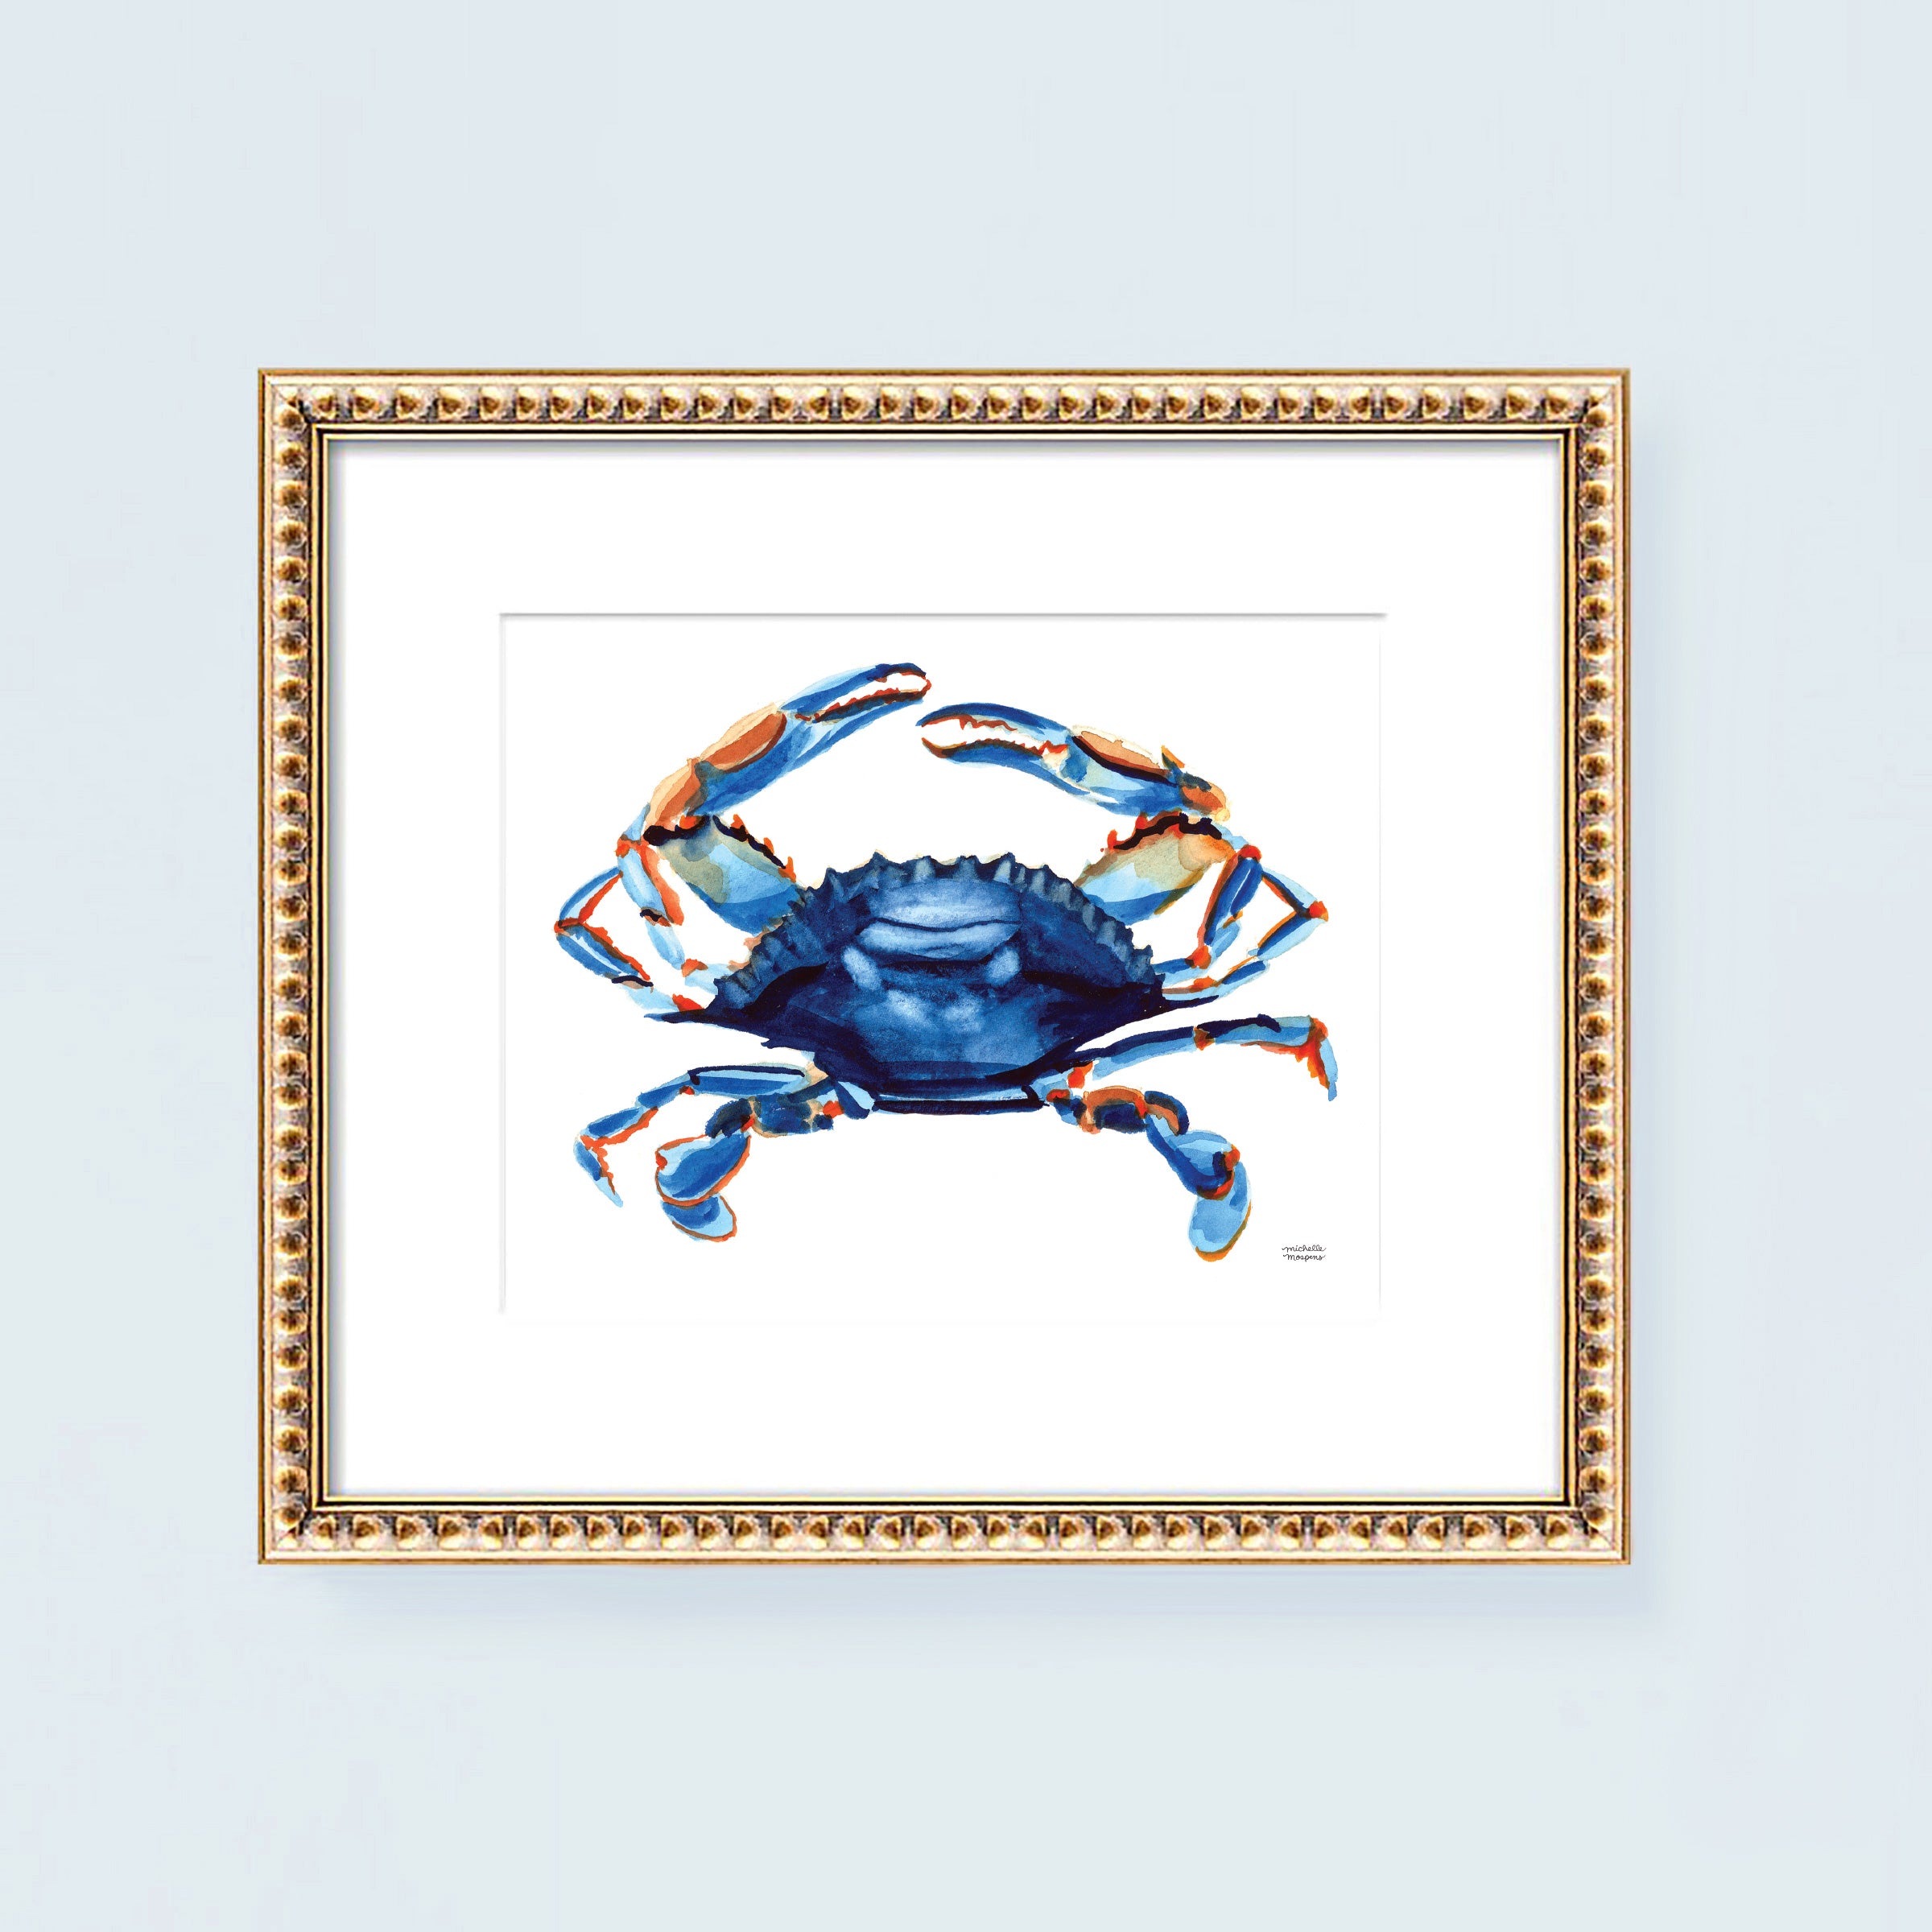 Watercolor blue crab painting wall art print by artist Michelle Mospens.